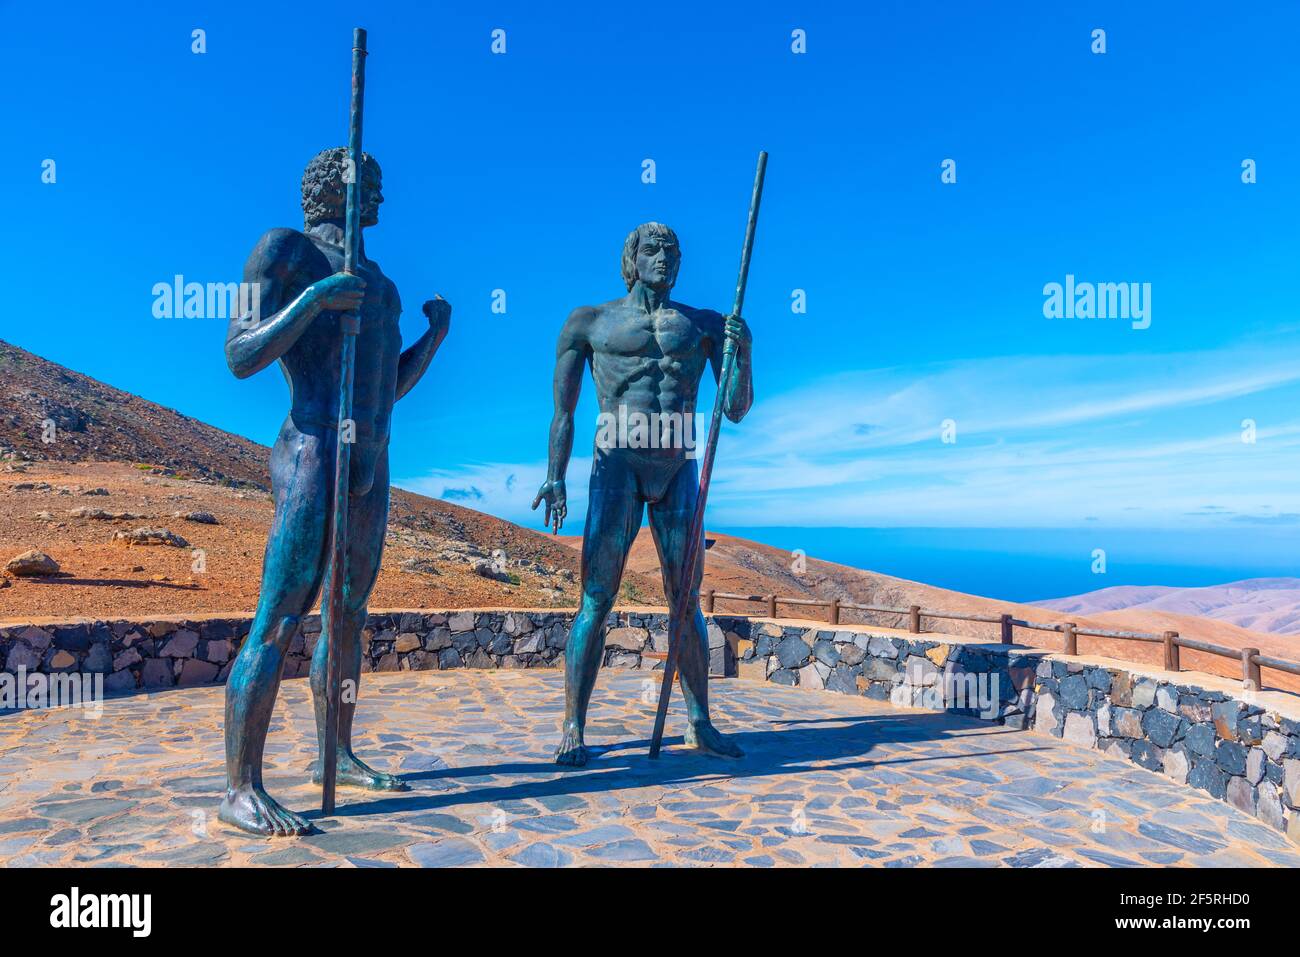 The statues of the Guanche kings Ayos and Guize at Fuerteventure, Canary islands, Spain. Stock Photo